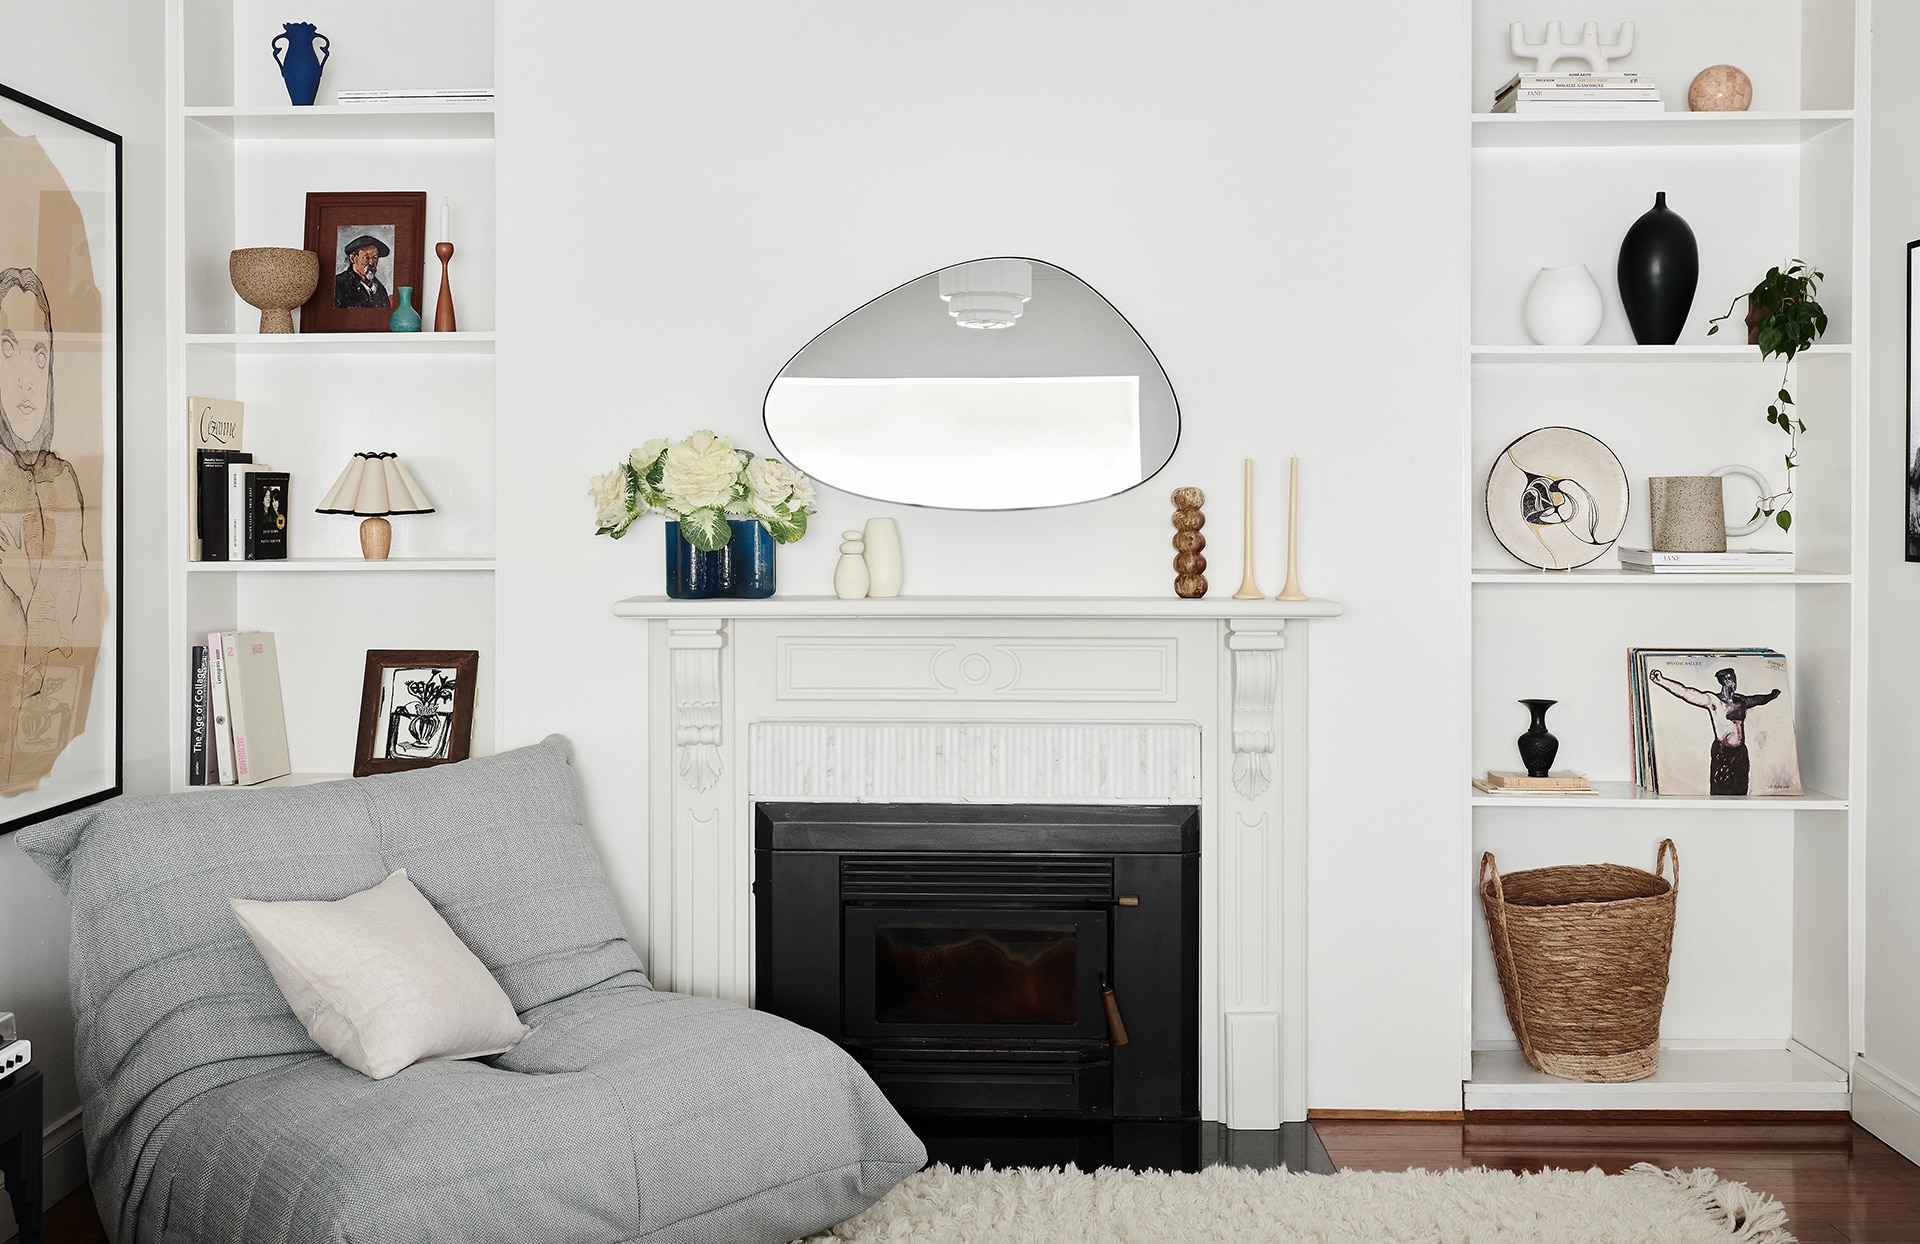 classic white living room. in middle is black fireplace with painted white wooden feature. grey lounge on corner has sheridan abbotson flax cushion. shelves on either side contain various knick-knacks.